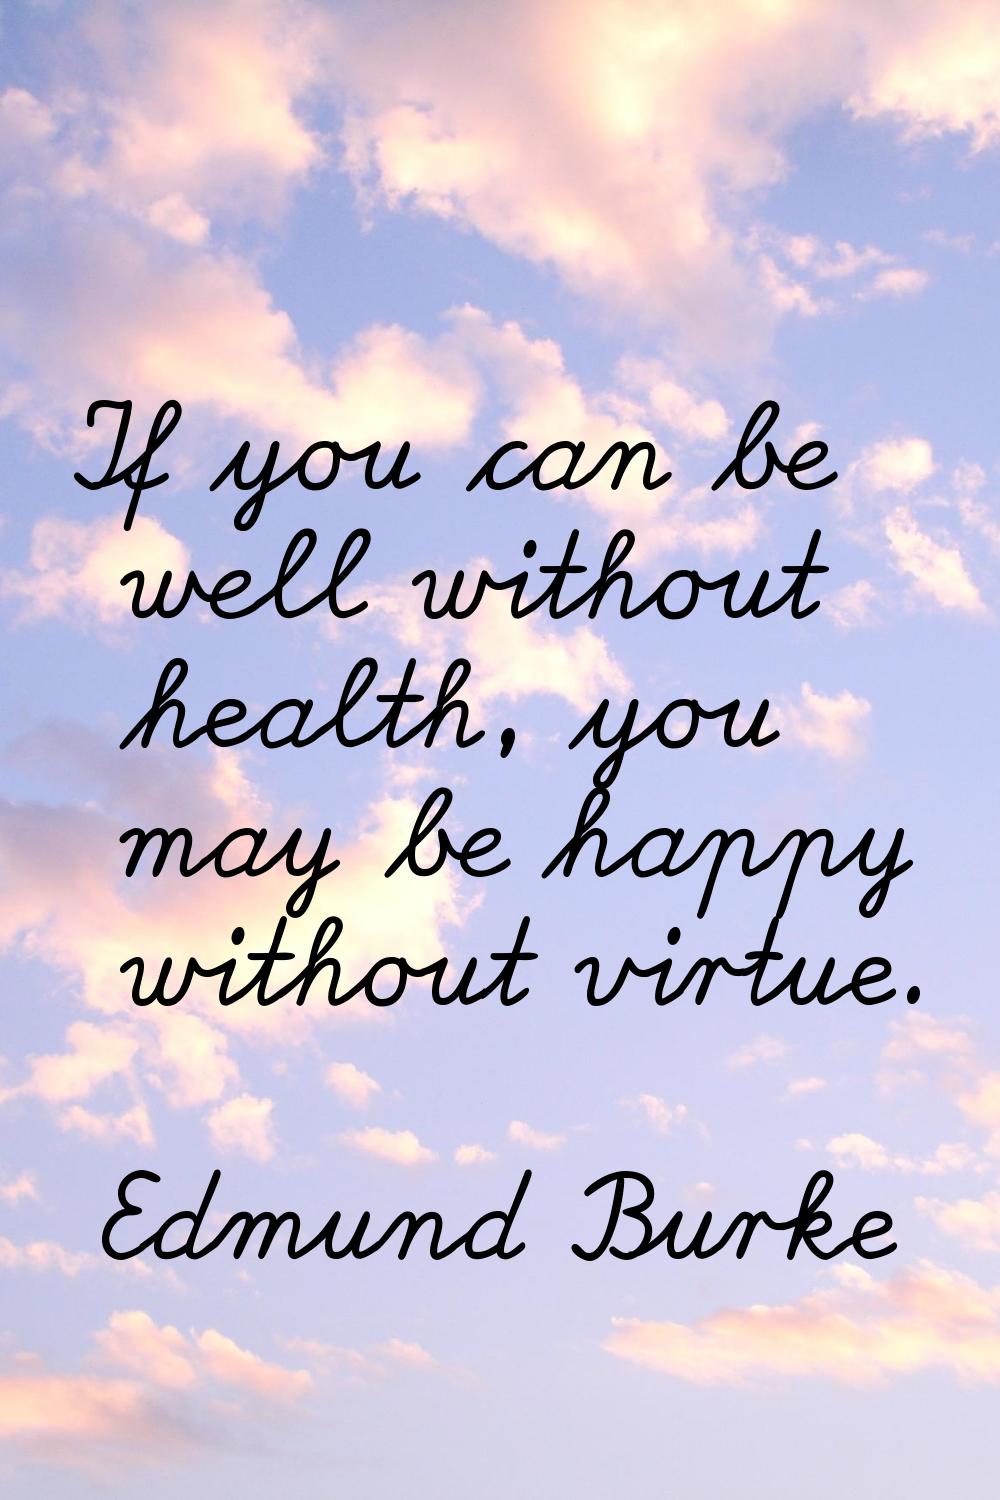 If you can be well without health, you may be happy without virtue.